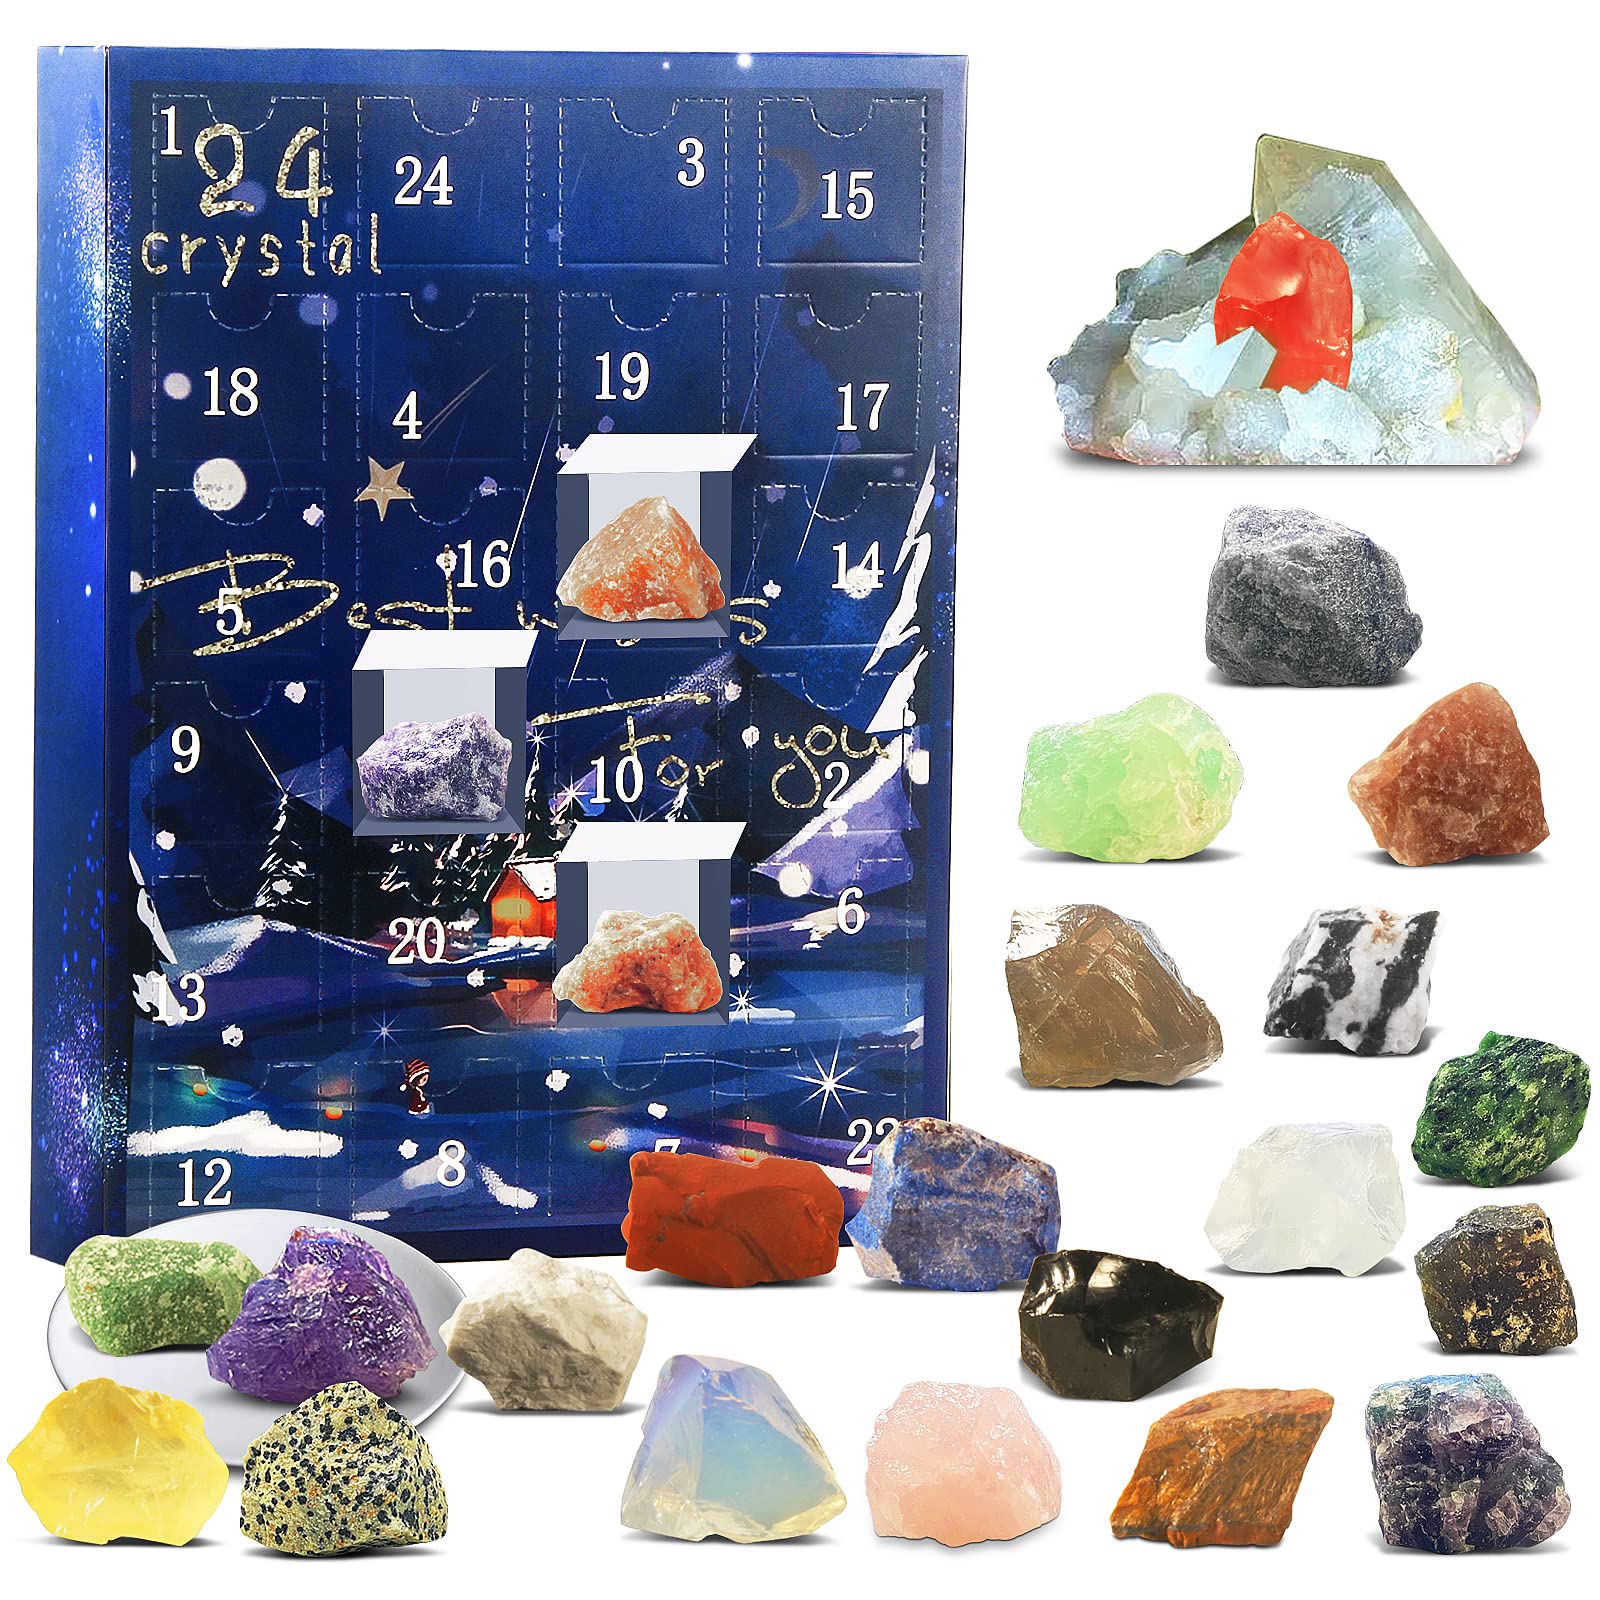 National Geographic Rock, Mineral & Fossil Advent Calendar by